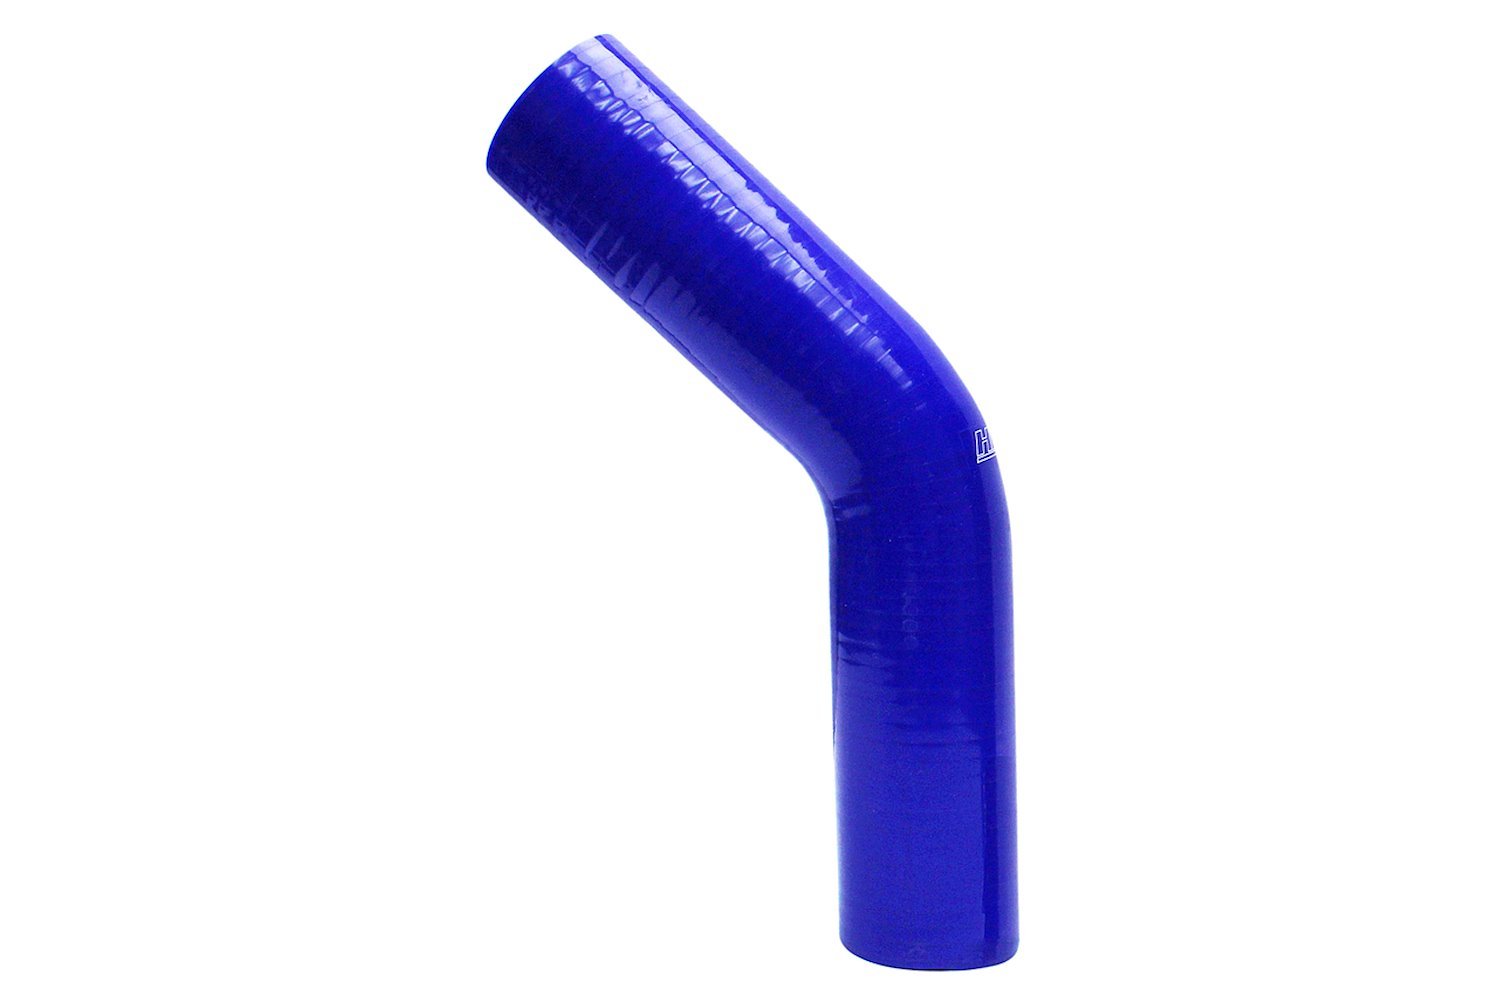 HTSEC45-256-BLUE Silicone 45-Degree Elbow Coupler Hose, High-Temp 4-Ply Reinforced, 2-9/16 in. ID, Blue